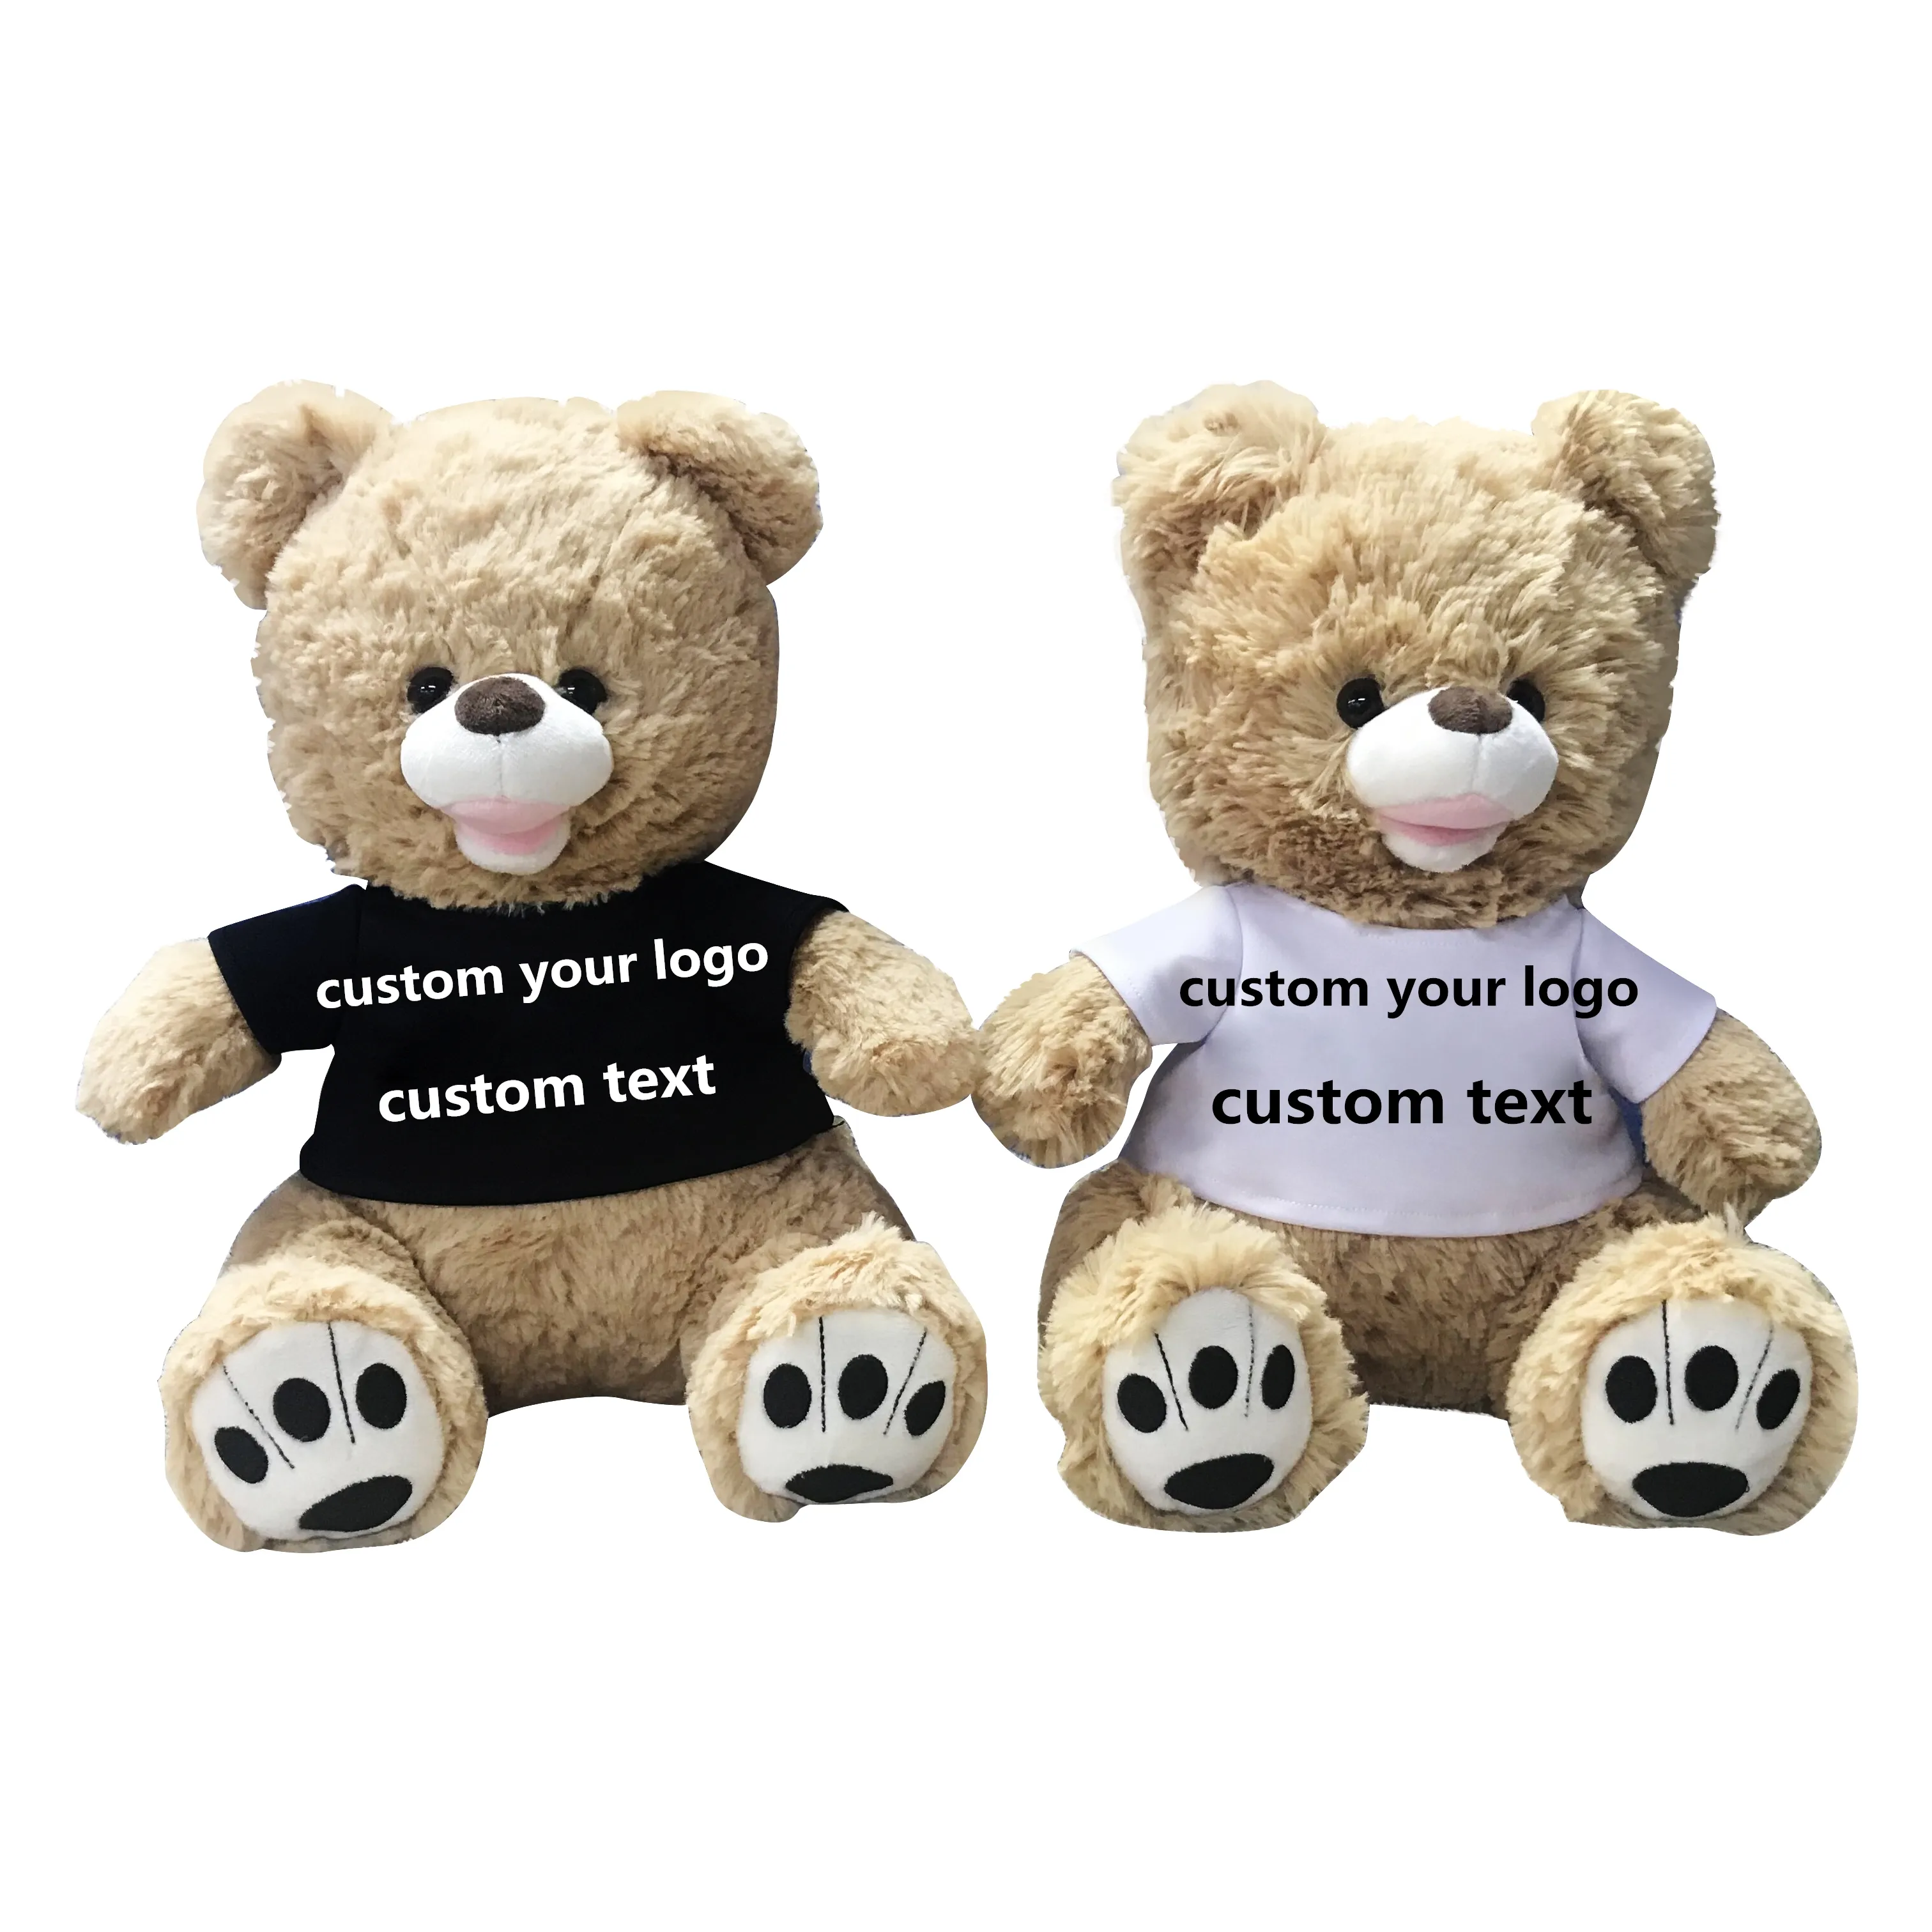 China Custom Plush Toys China Custom Plush Toys Manufacturers And Suppliers On Alibaba Com - roblox plush make your own character products in 2019